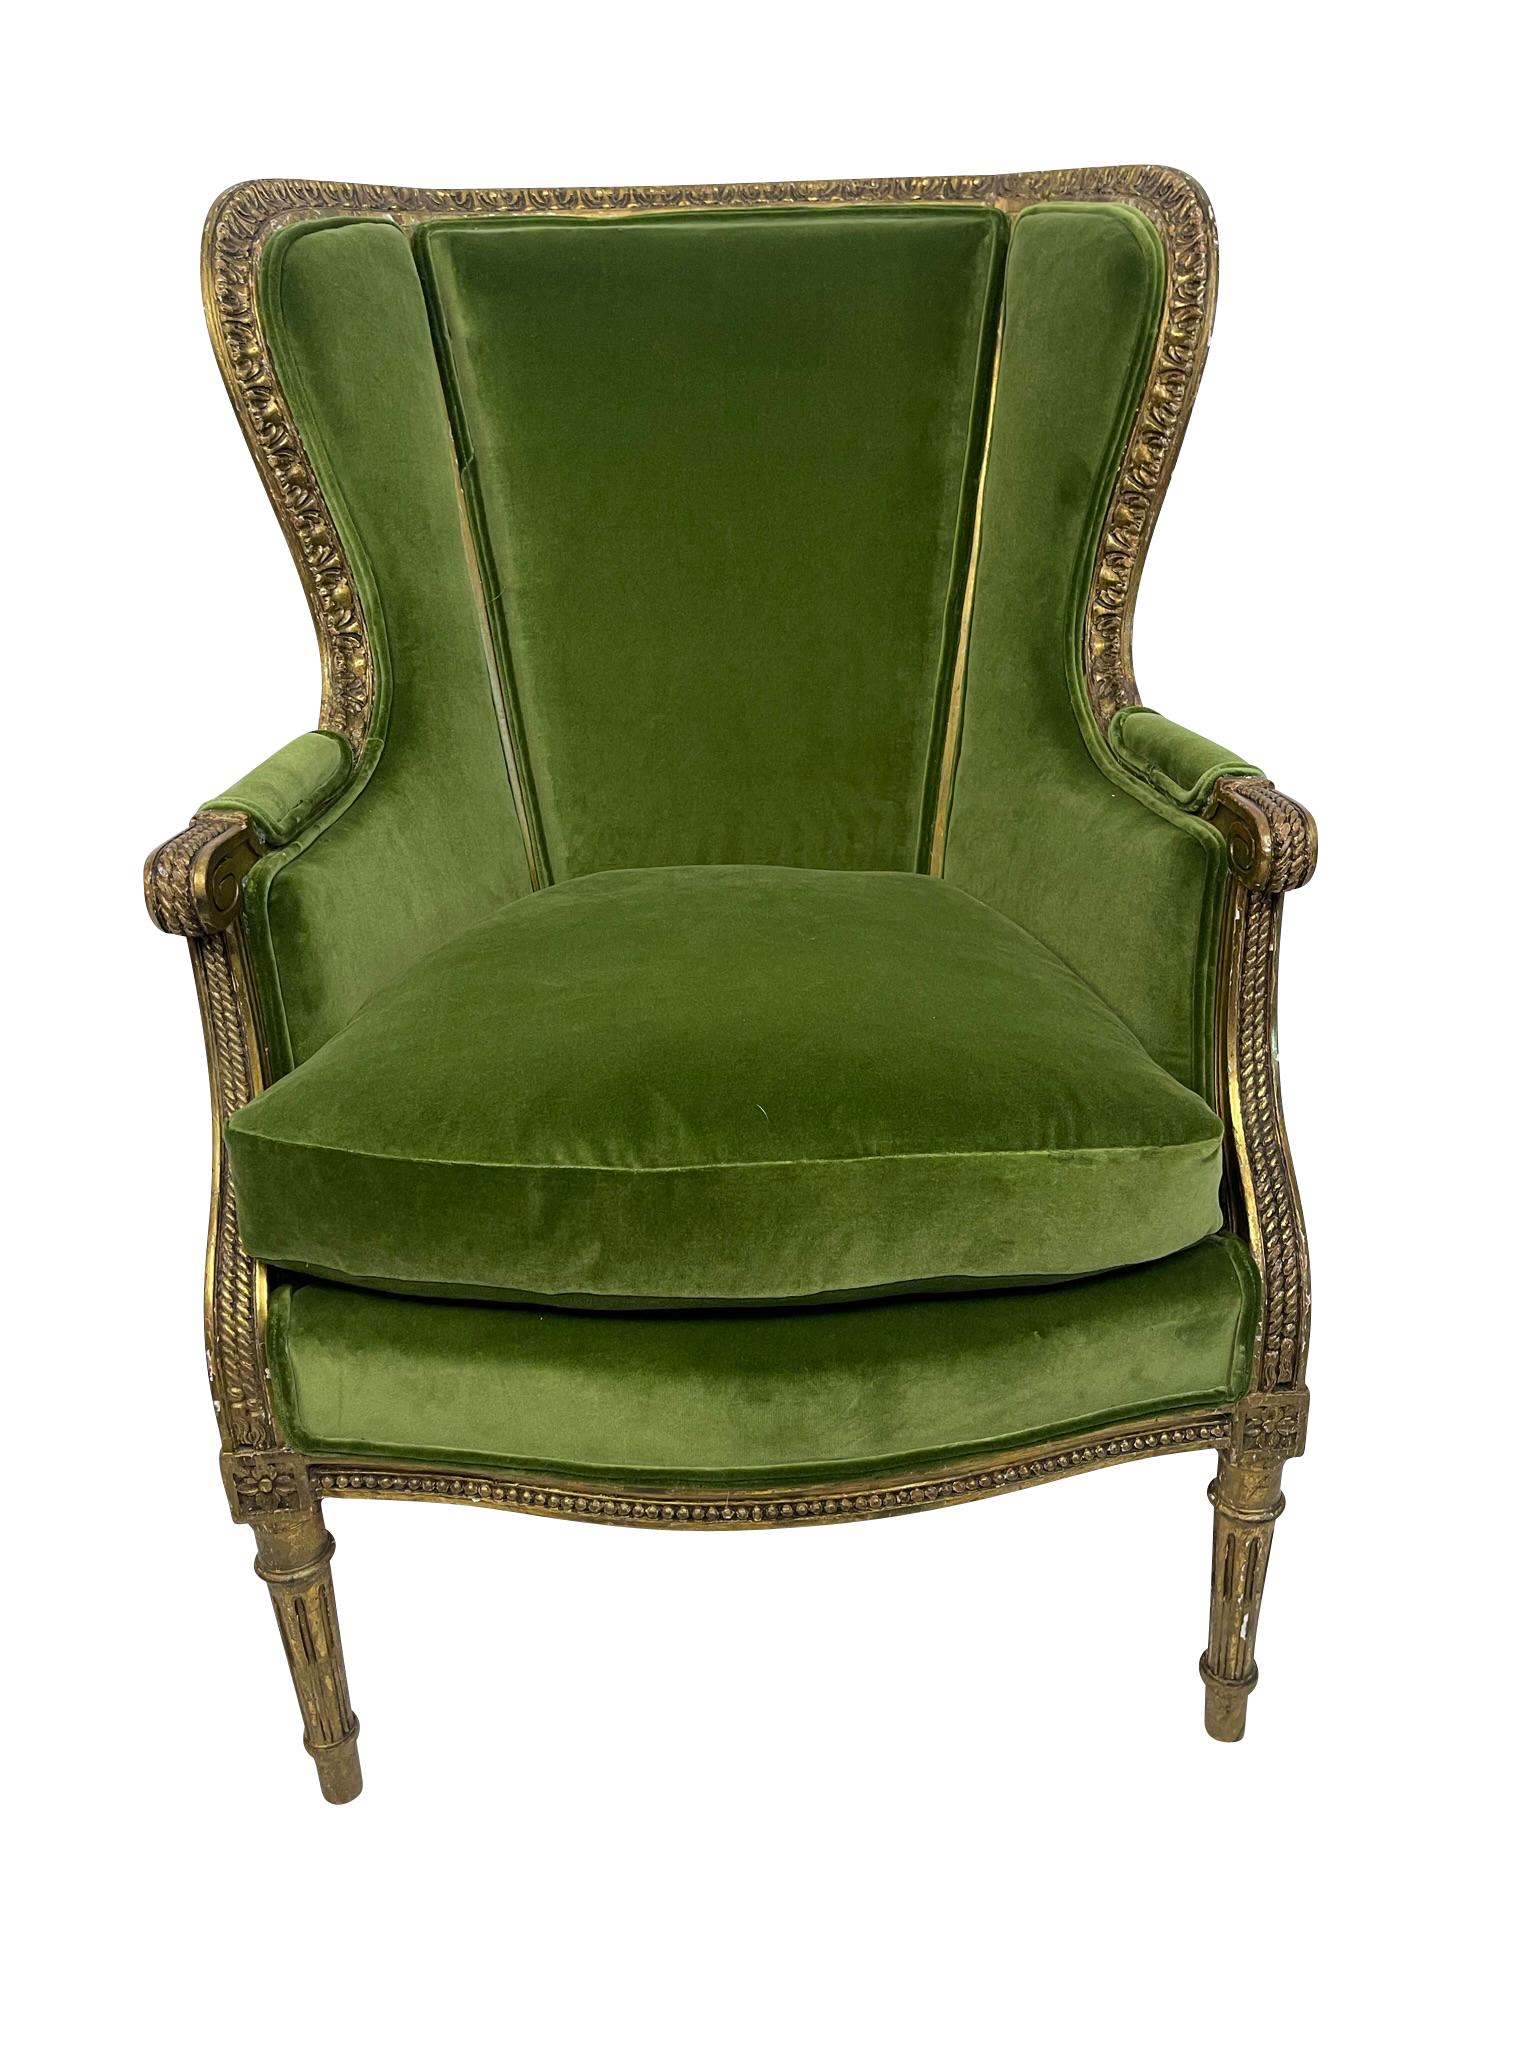 Louis XVI Style Giltwood Carved Bergere/ Arnchair with Green Velvet For Sale 3